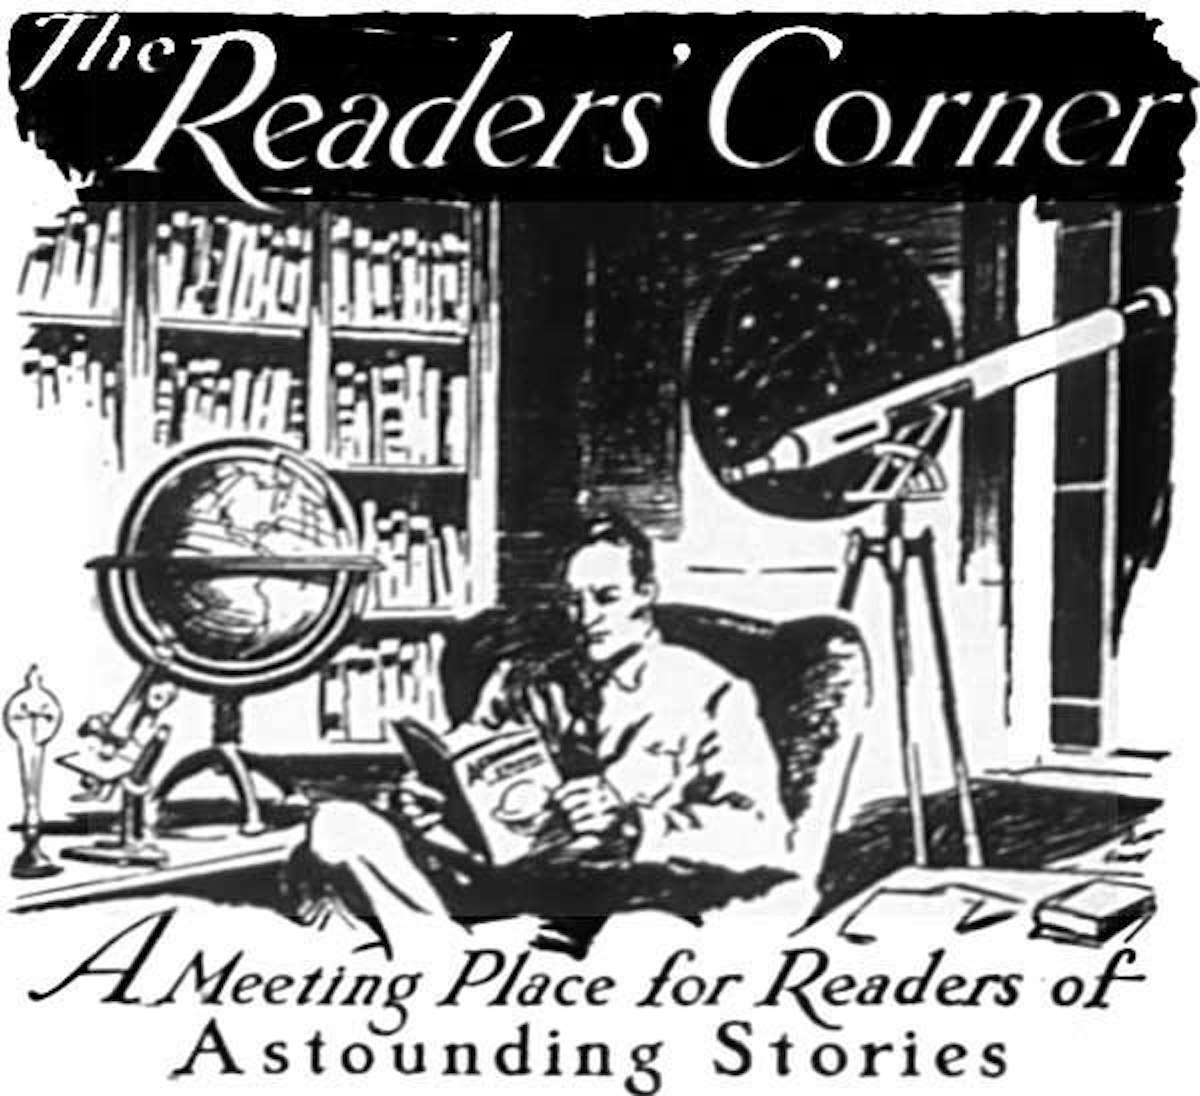 featured image - Astounding Stories of Super-Science May 1931: VOL. VI, No. 2 - The Readers' Corner